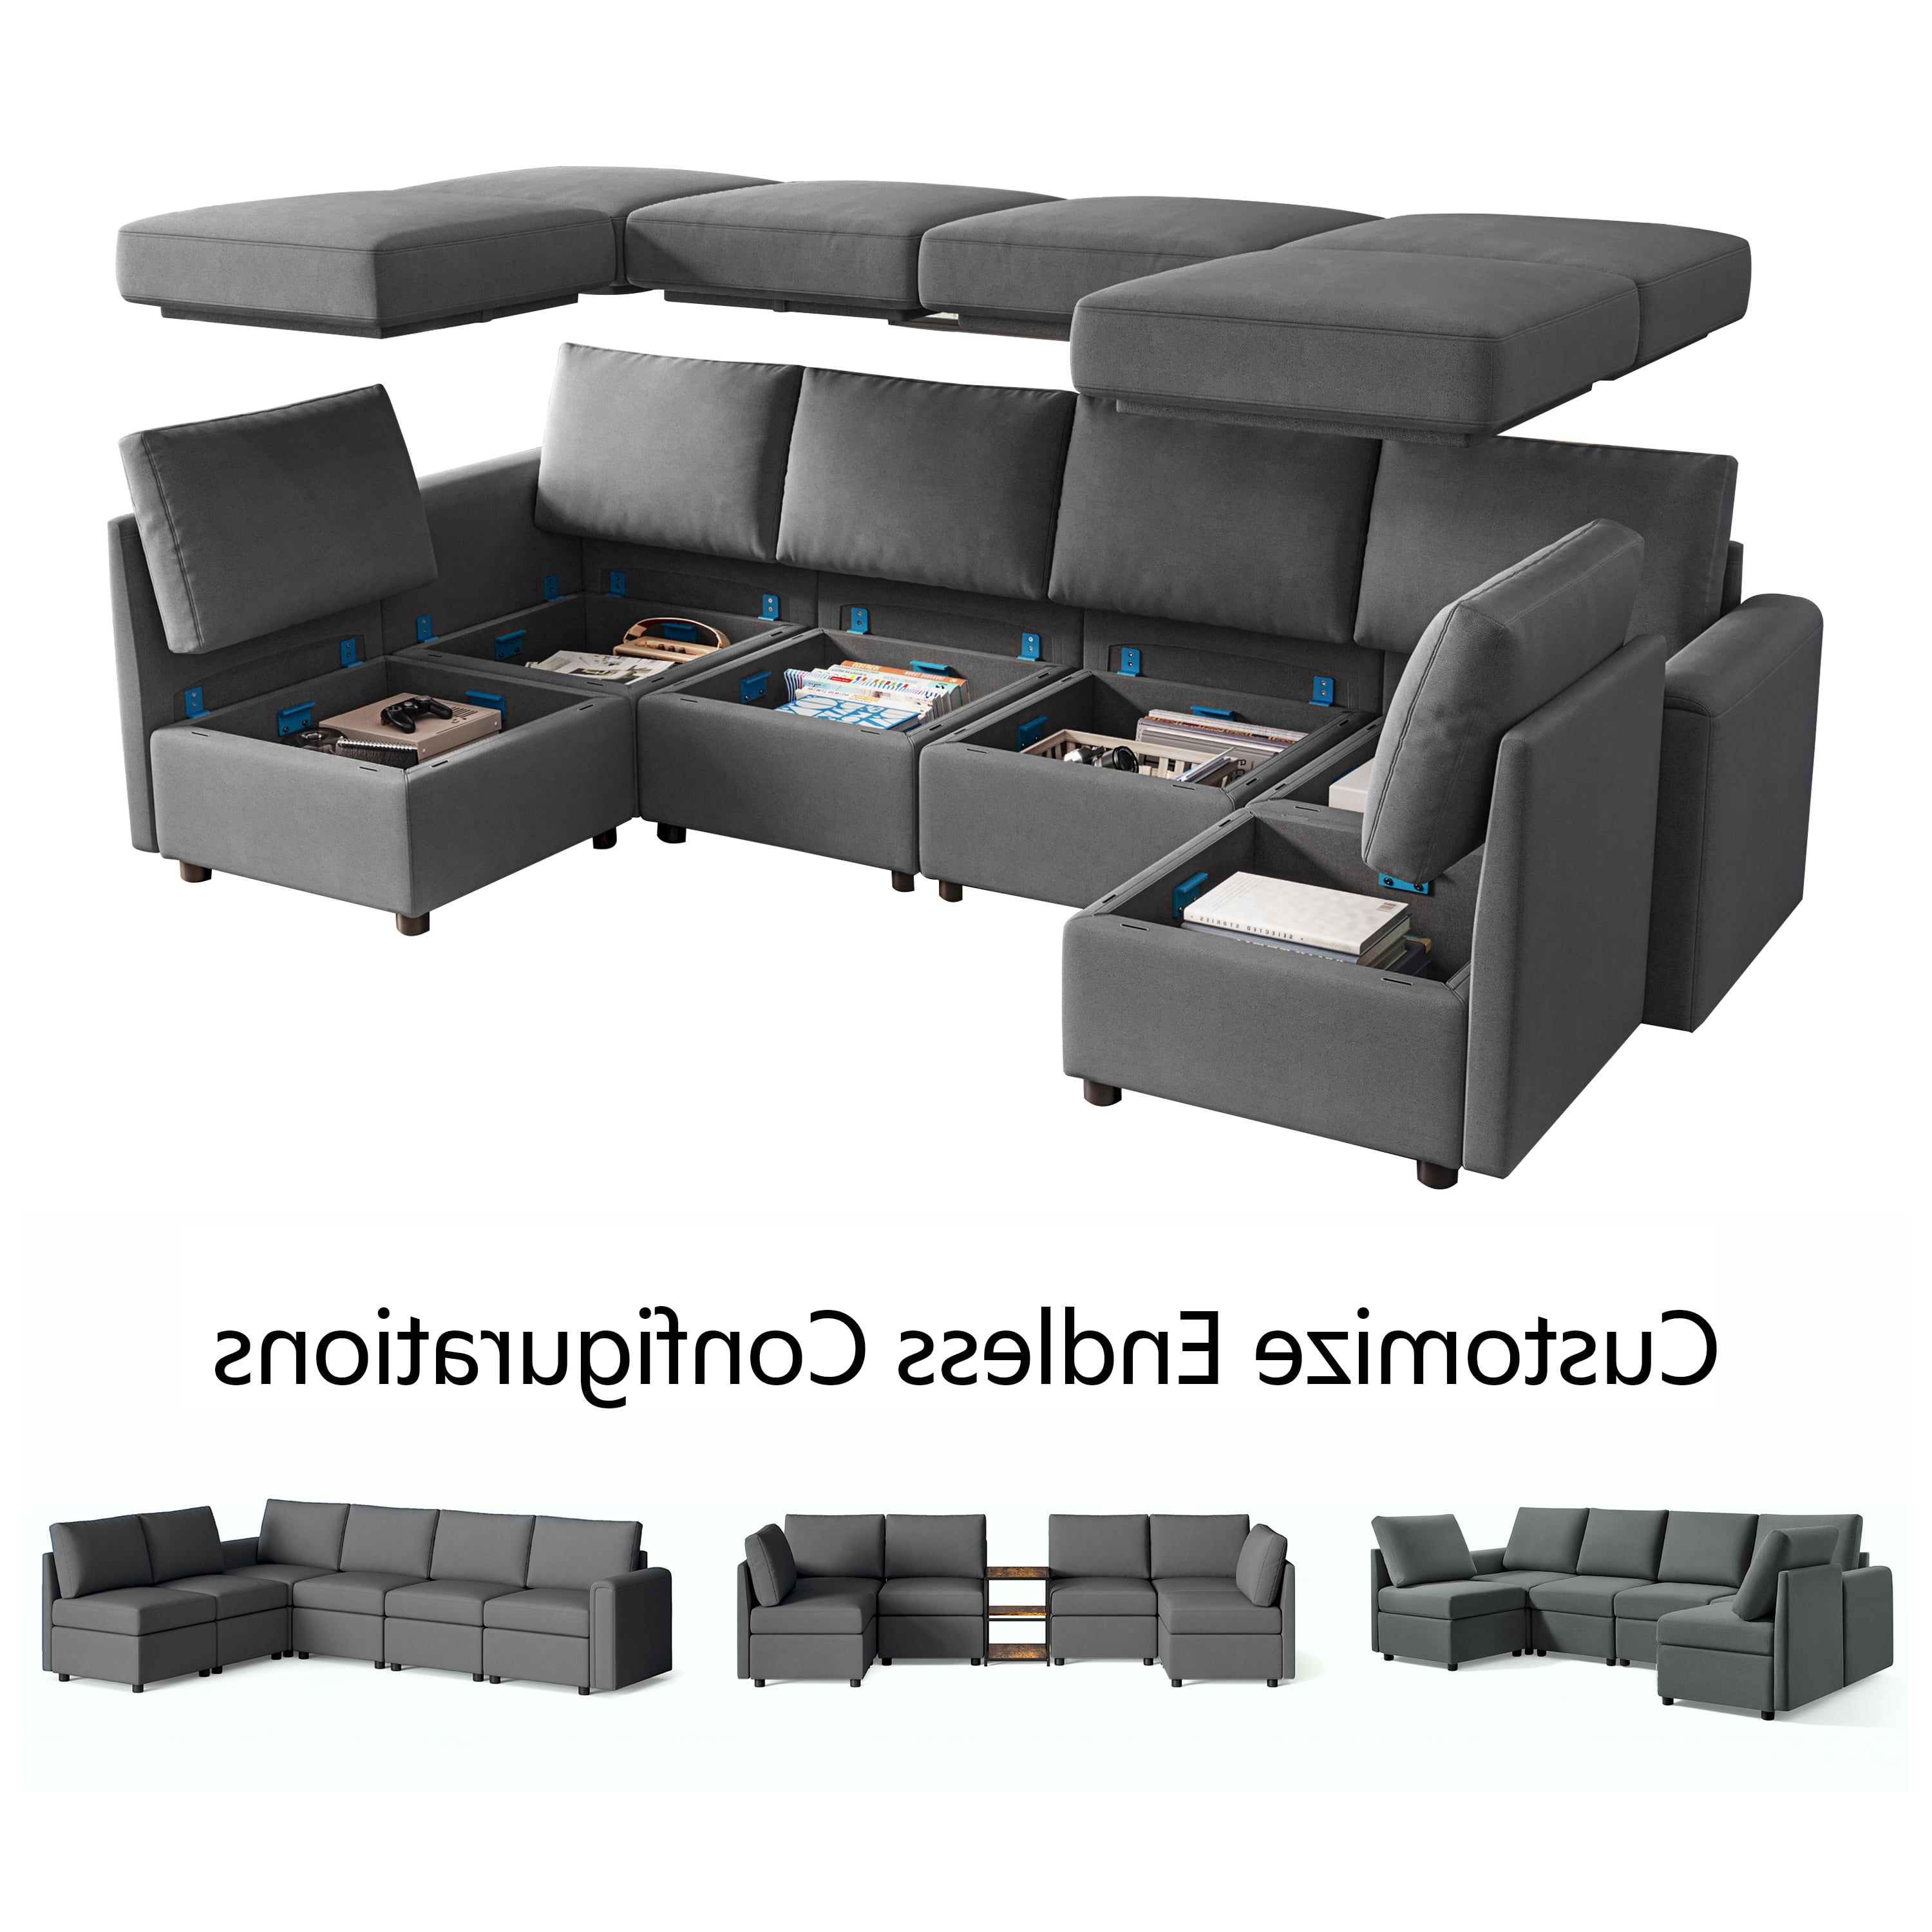 Linsy Home Modular Couches And Sofas Sectional With Storage Sectional Sofa  U Shaped Sectional Couch With Reversible Chaises, Dark Gray – Walmart With Sectional Sofa With Storage (Gallery 3 of 20)